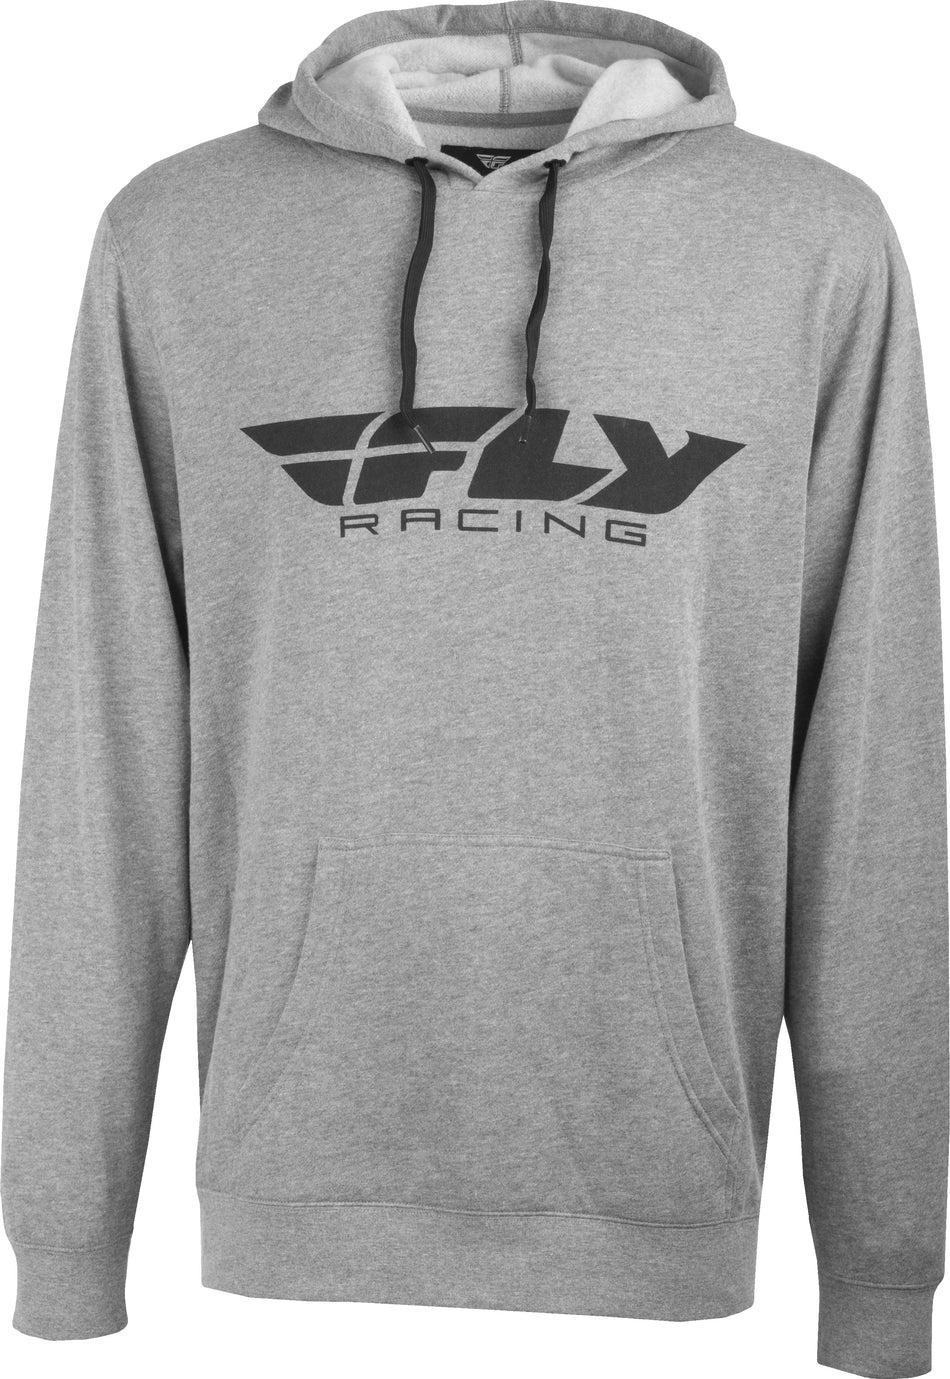 FLY RACING Fly Corporate Pullover Hoodie Grey Heather Sm 354-0036S